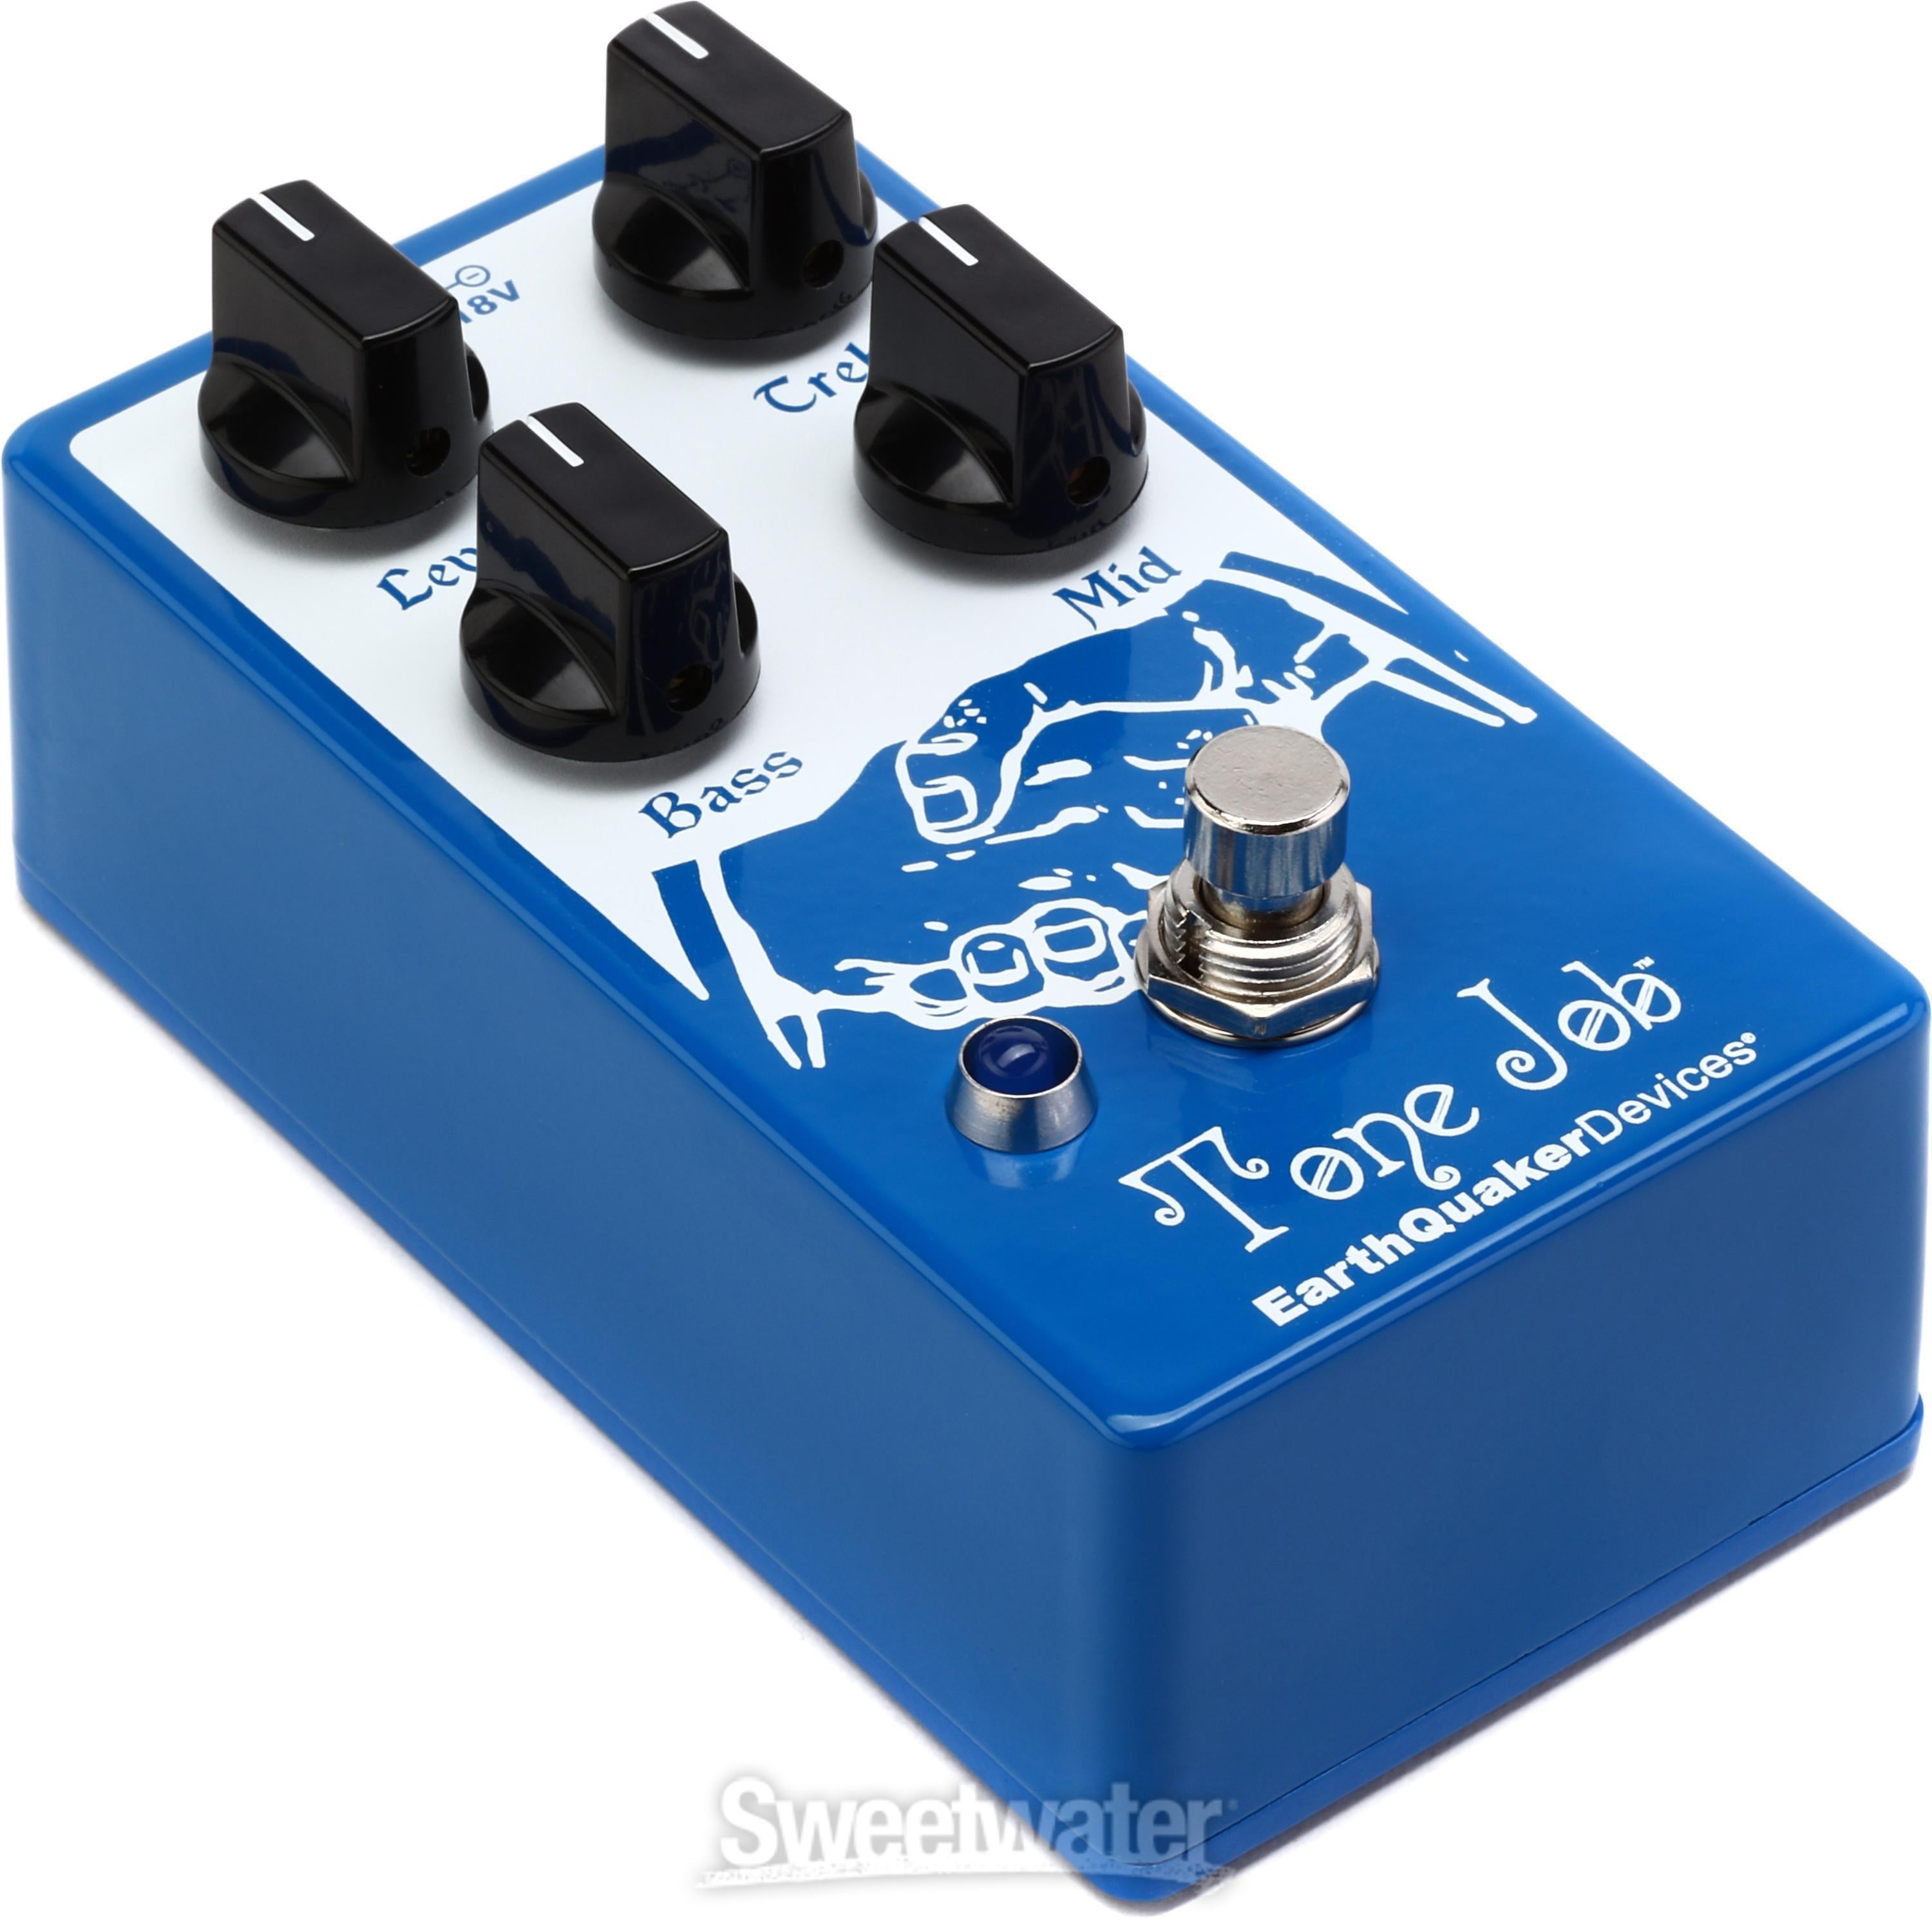 EarthQuaker Devices Tone Job V2 EQ and Boost Pedal | Sweetwater